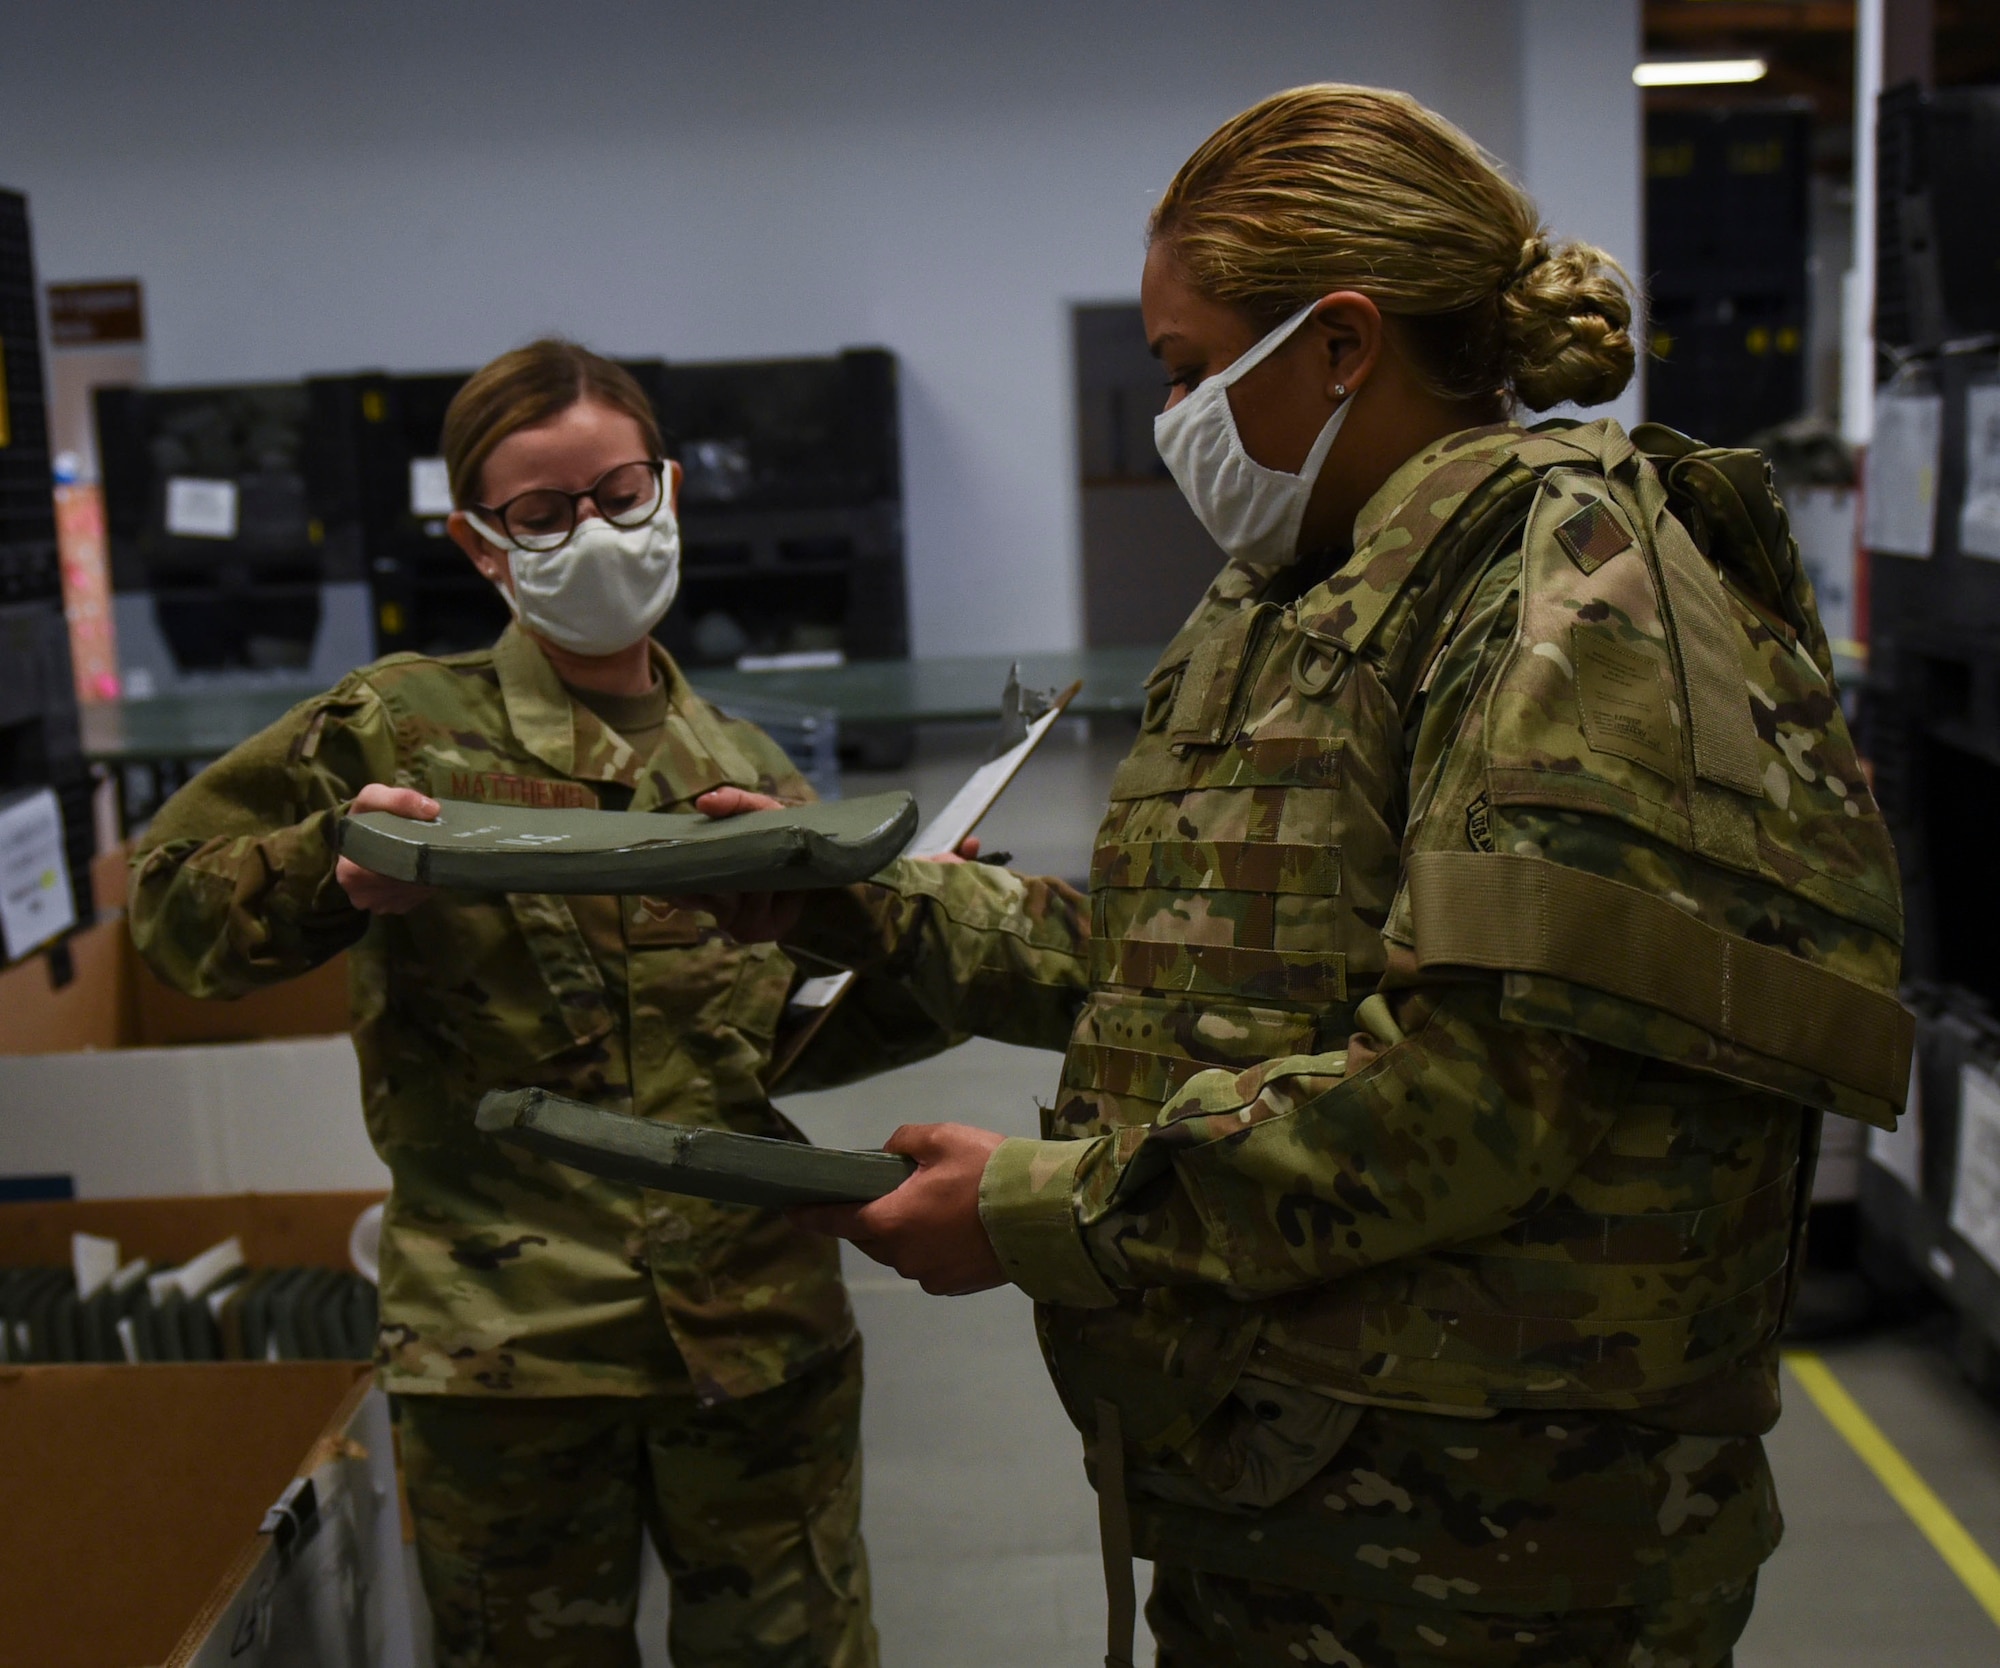 U.S. Air Force Airman 1st Class Bruna Matthews, left, 52nd Logistics Readiness Squadron Individual Protective Equipment apprentice, and Senior Airman Alyssa Padilla, right, 52nd LRS IPE journeyman, demonstrate prepping a vest, June 4, 2020, at Spangdahlem Air Base, Germany. LRS Airmen learned to adjust to the rapid changes of the COVID-19 pandemic, and executed their mission of ensuring the 52nd Fighter Wing and surrounding geographically separated units were properly equipped with protective gear during this pandemic. (U.S. Air Force photo by Senior Airman Melody W. Howley)